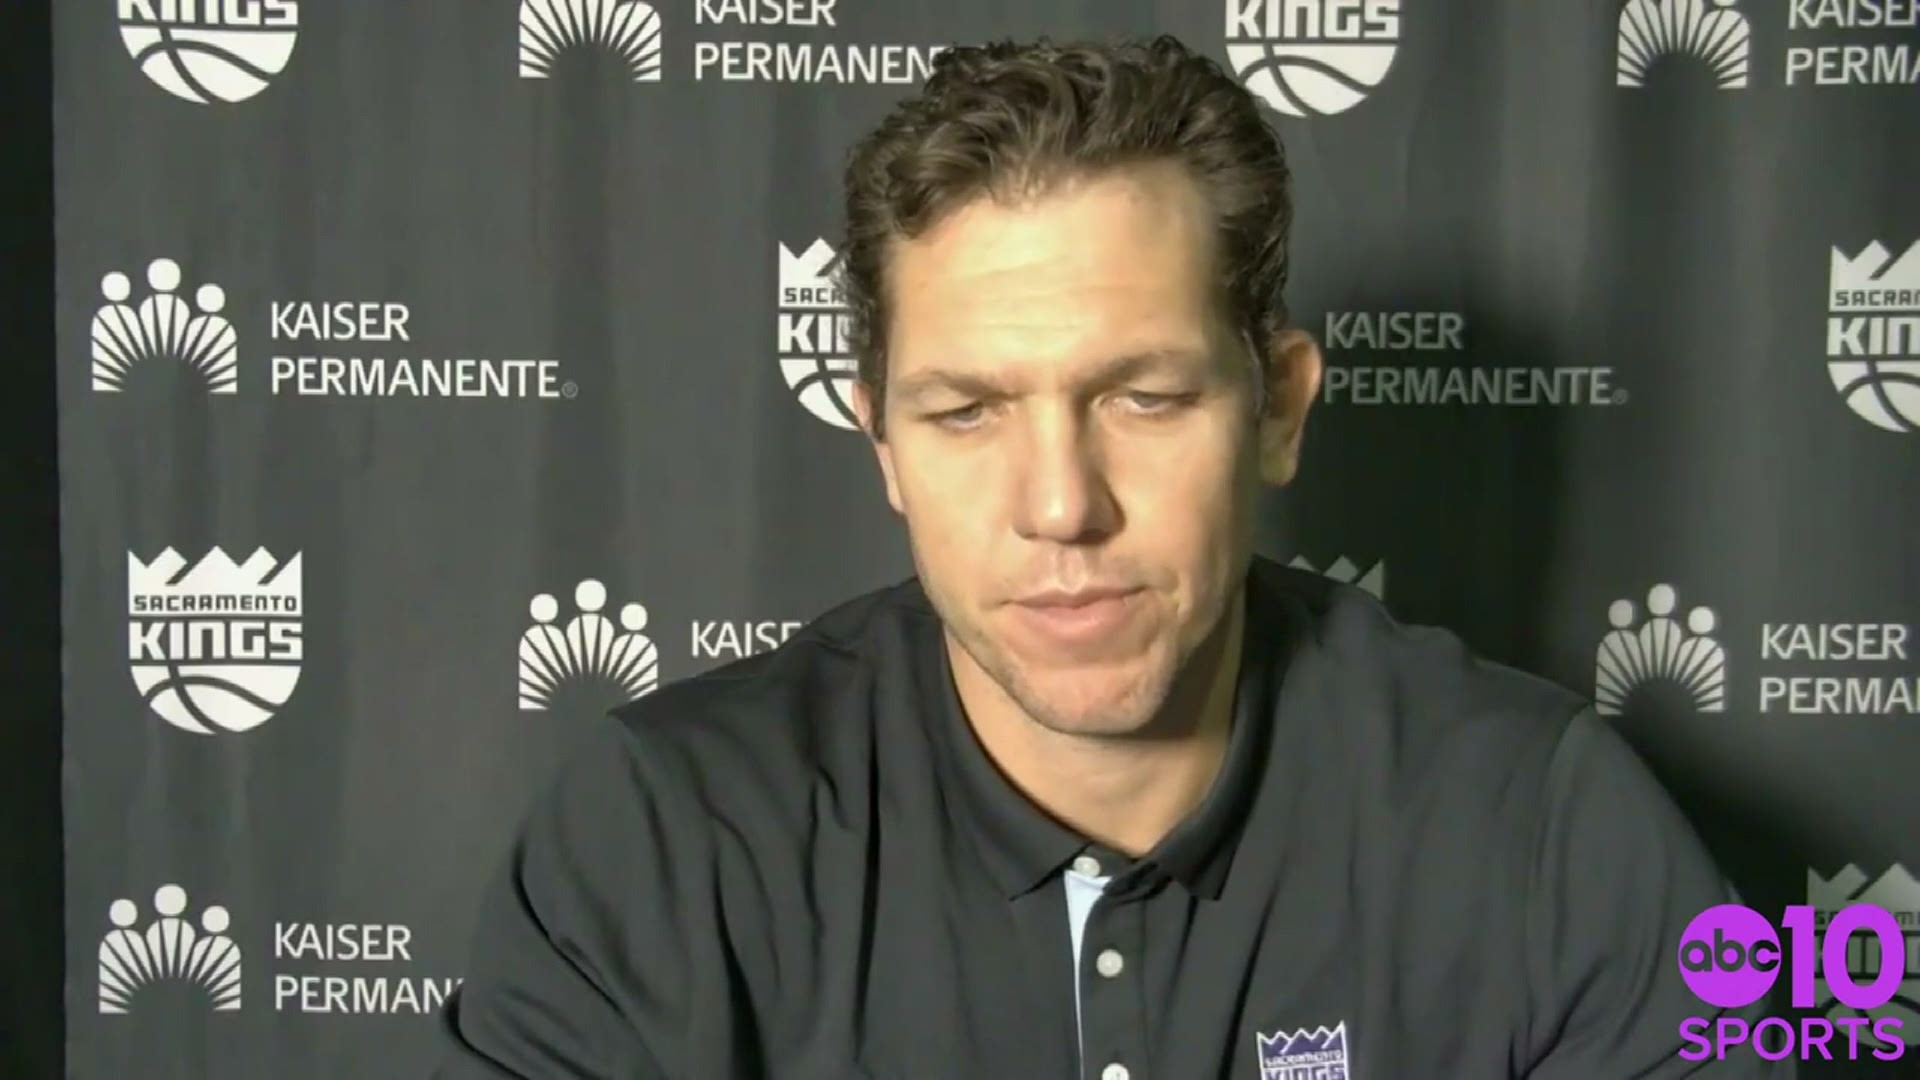 Sacramento Kings head coach Luke Walton on the 137-106 loss to the Golden State Warriors and the lackluster performance from his team on Monday night.